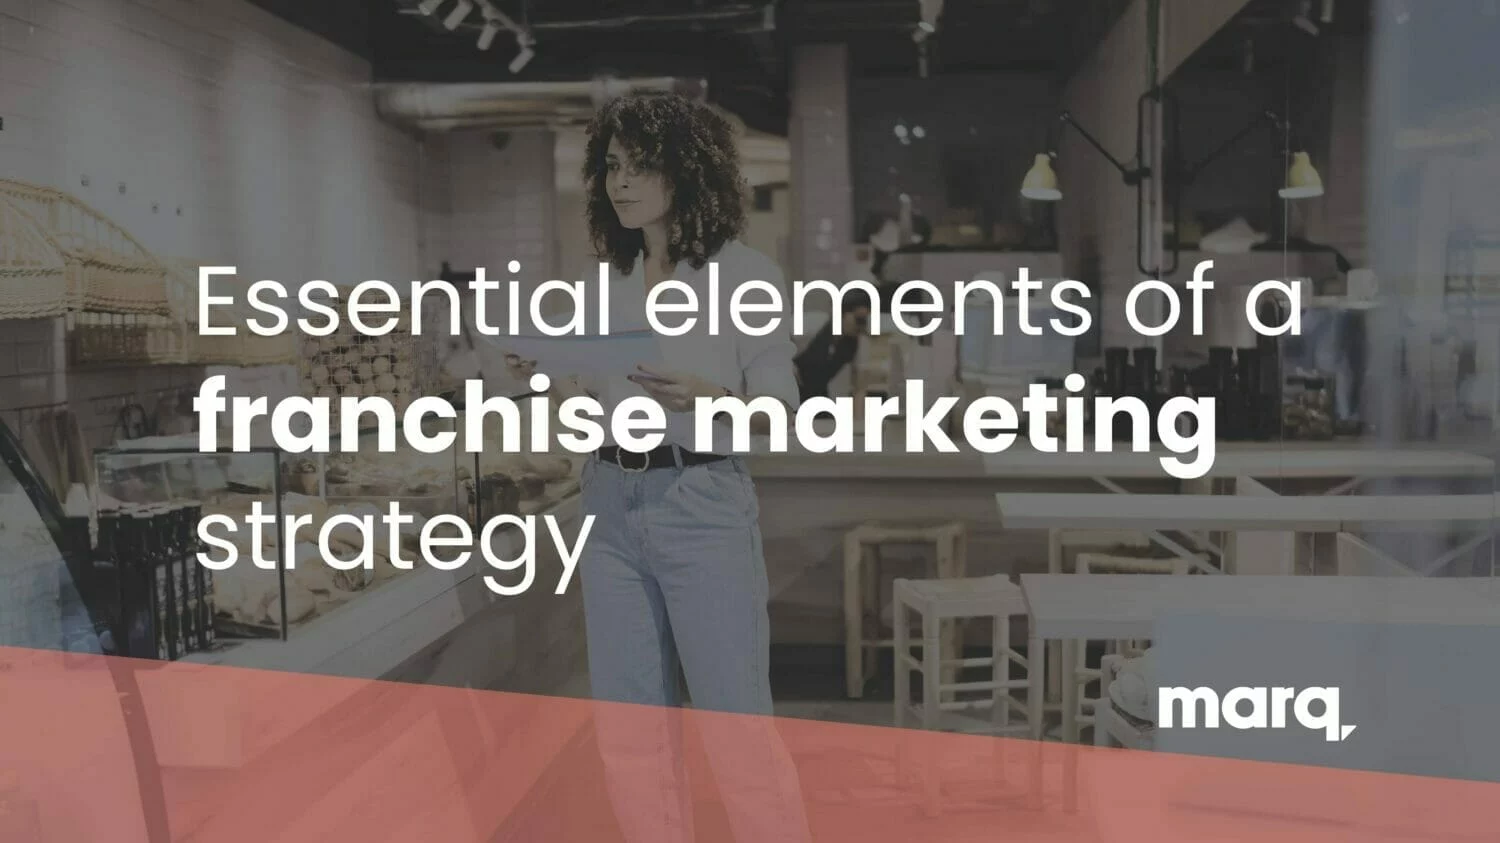 Essential elements of a franchise marketing strategy